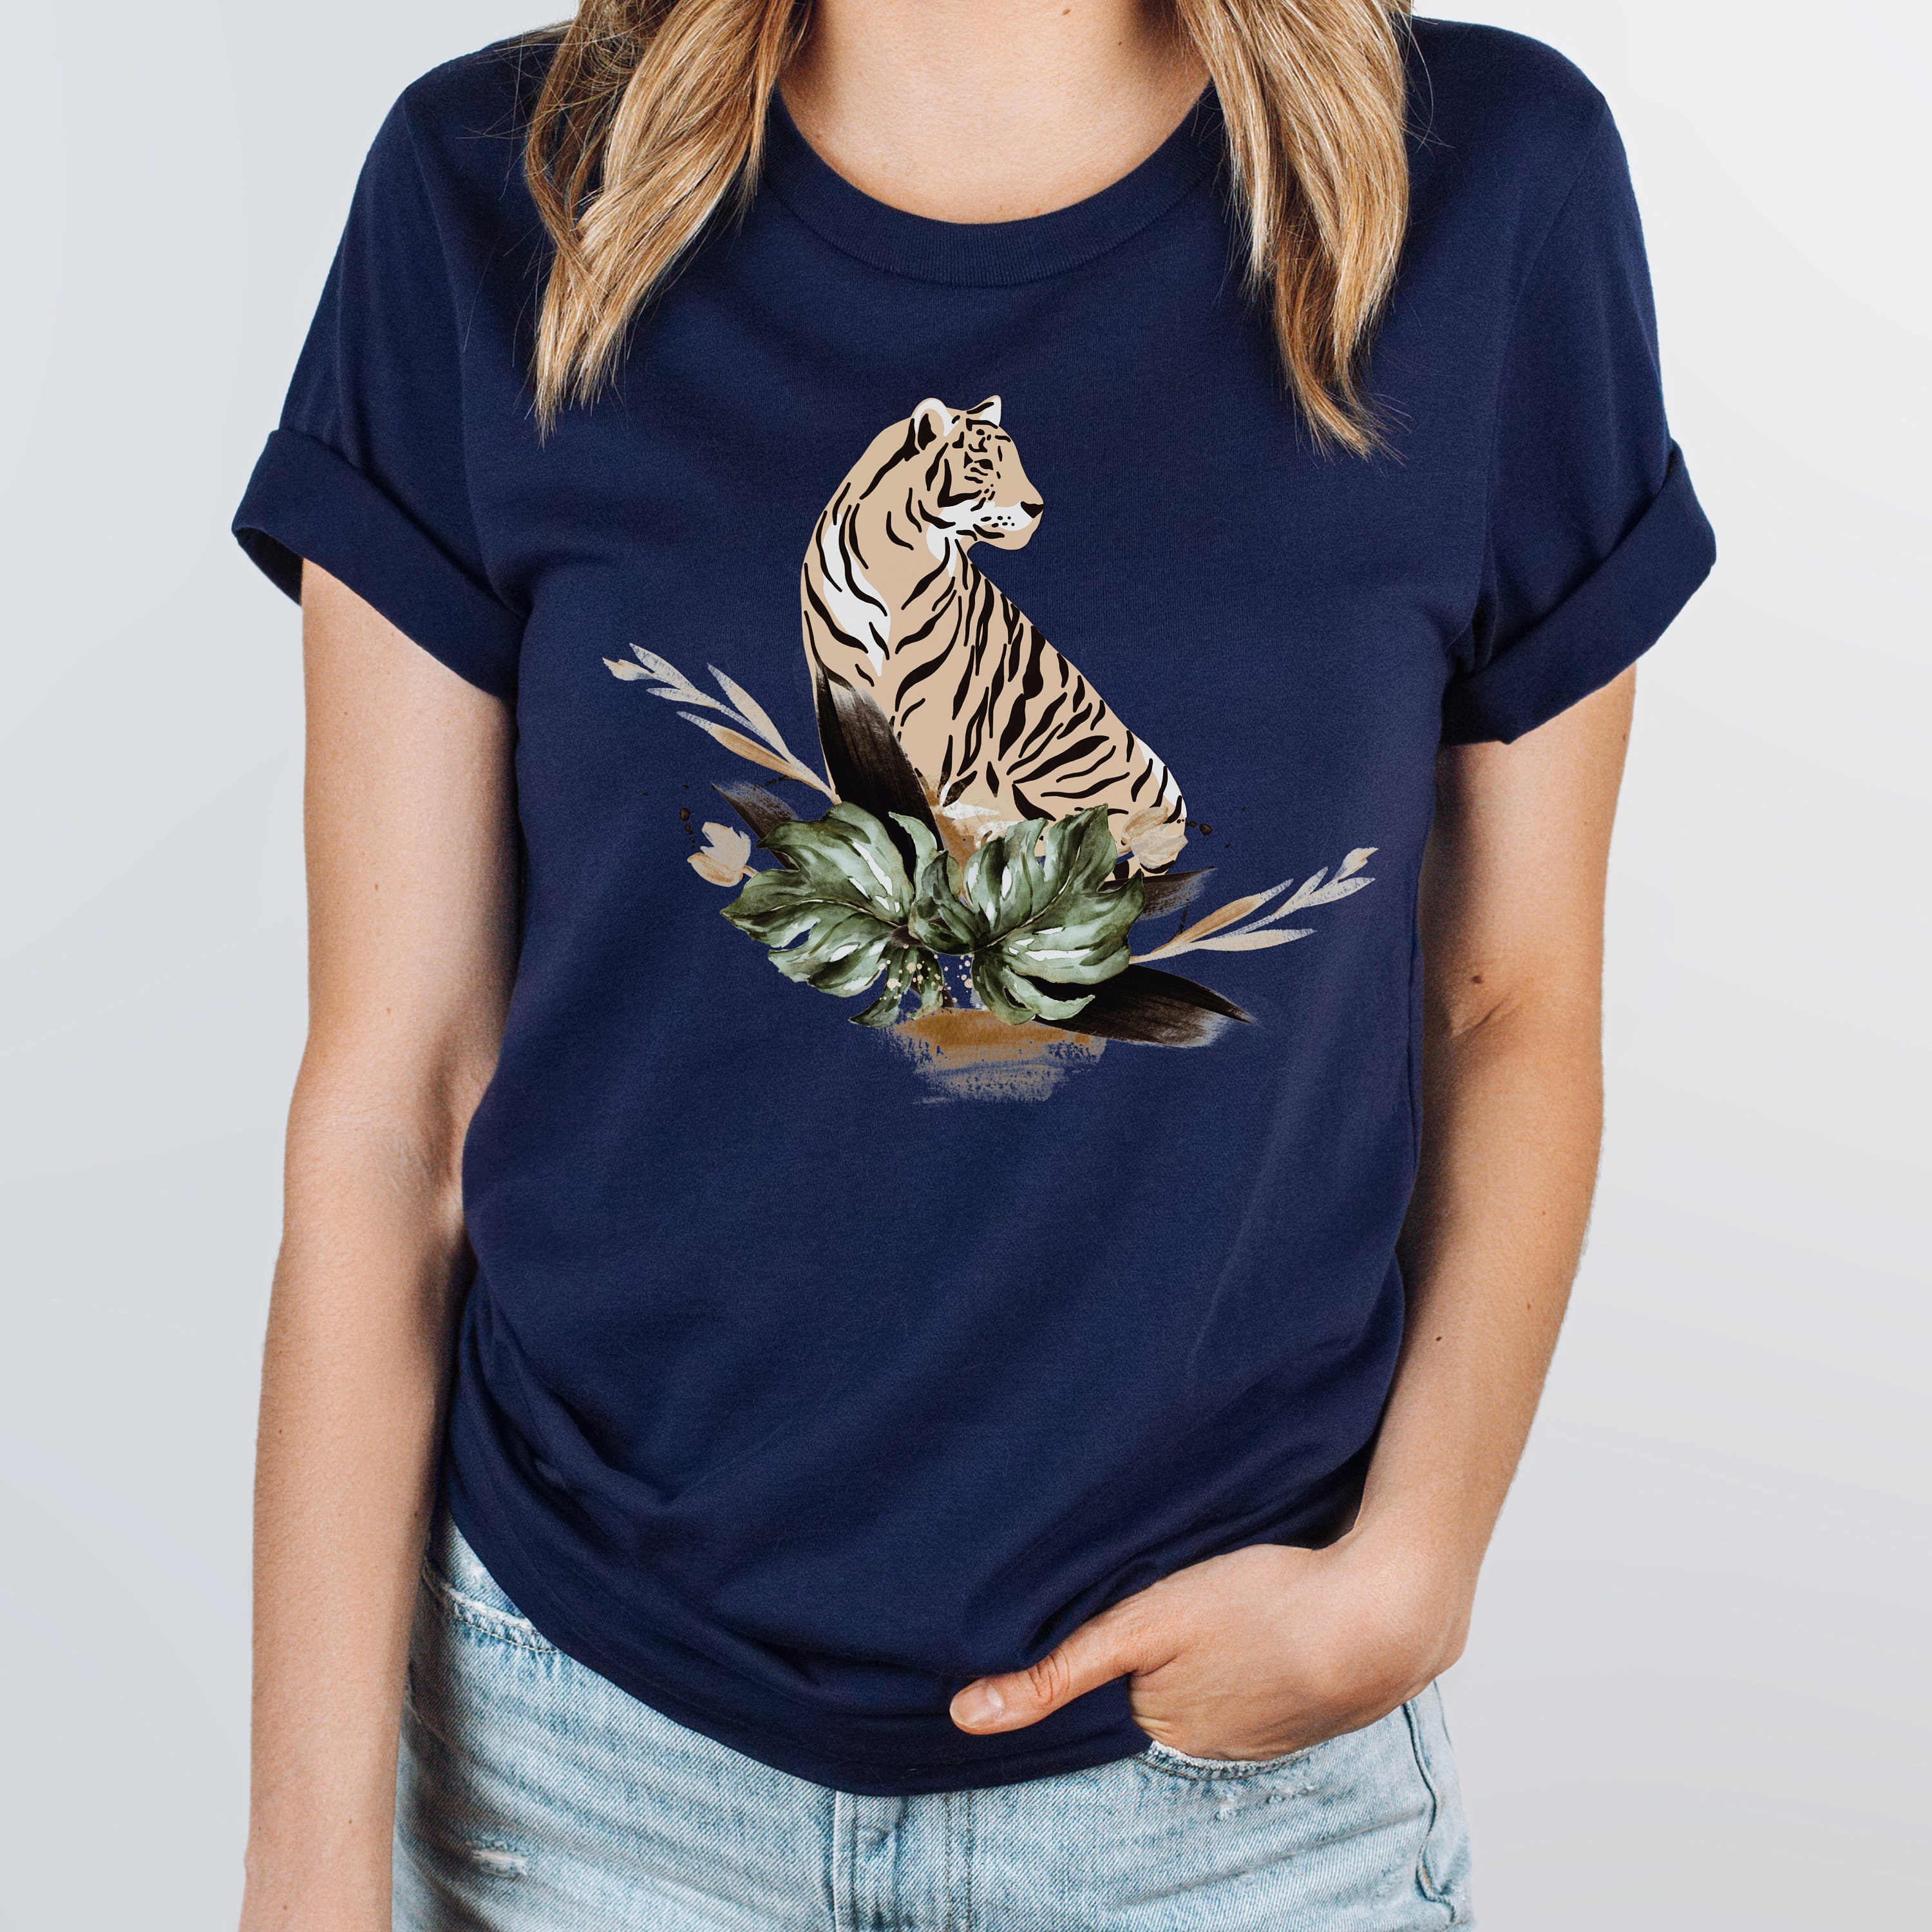 Women's Oversized T-Shirt Tropical Jungle Vintage Tee Get em Tiger Gif for her Tiger Graphic Tee